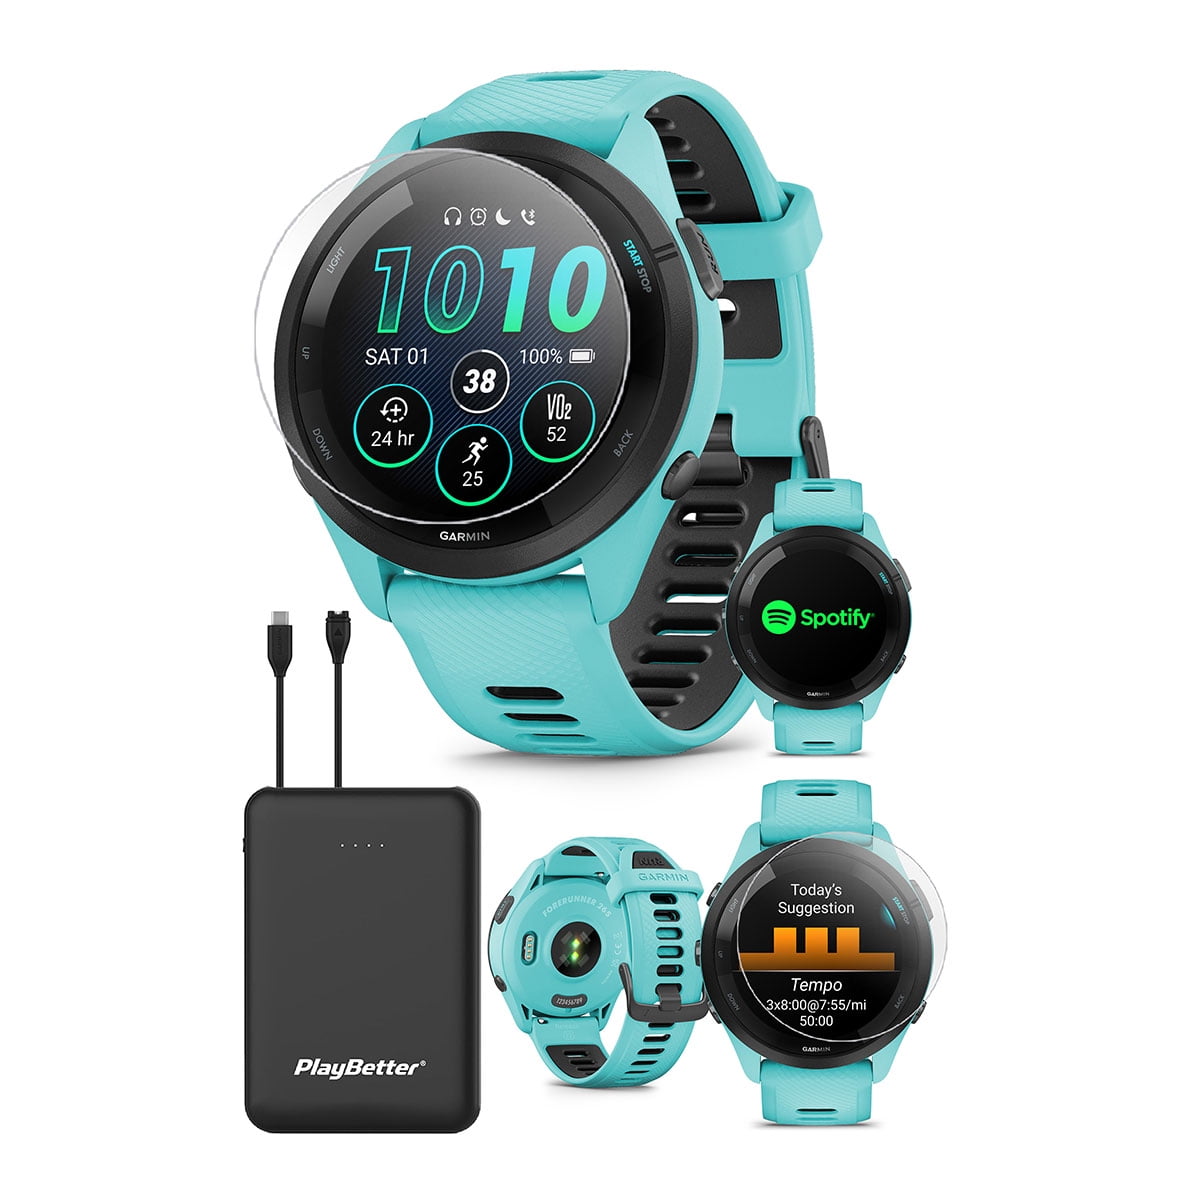 Rediscover the jogger's delight and grab the impressive Garmin Forerunner  945 for 50% off at Walmart - PhoneArena